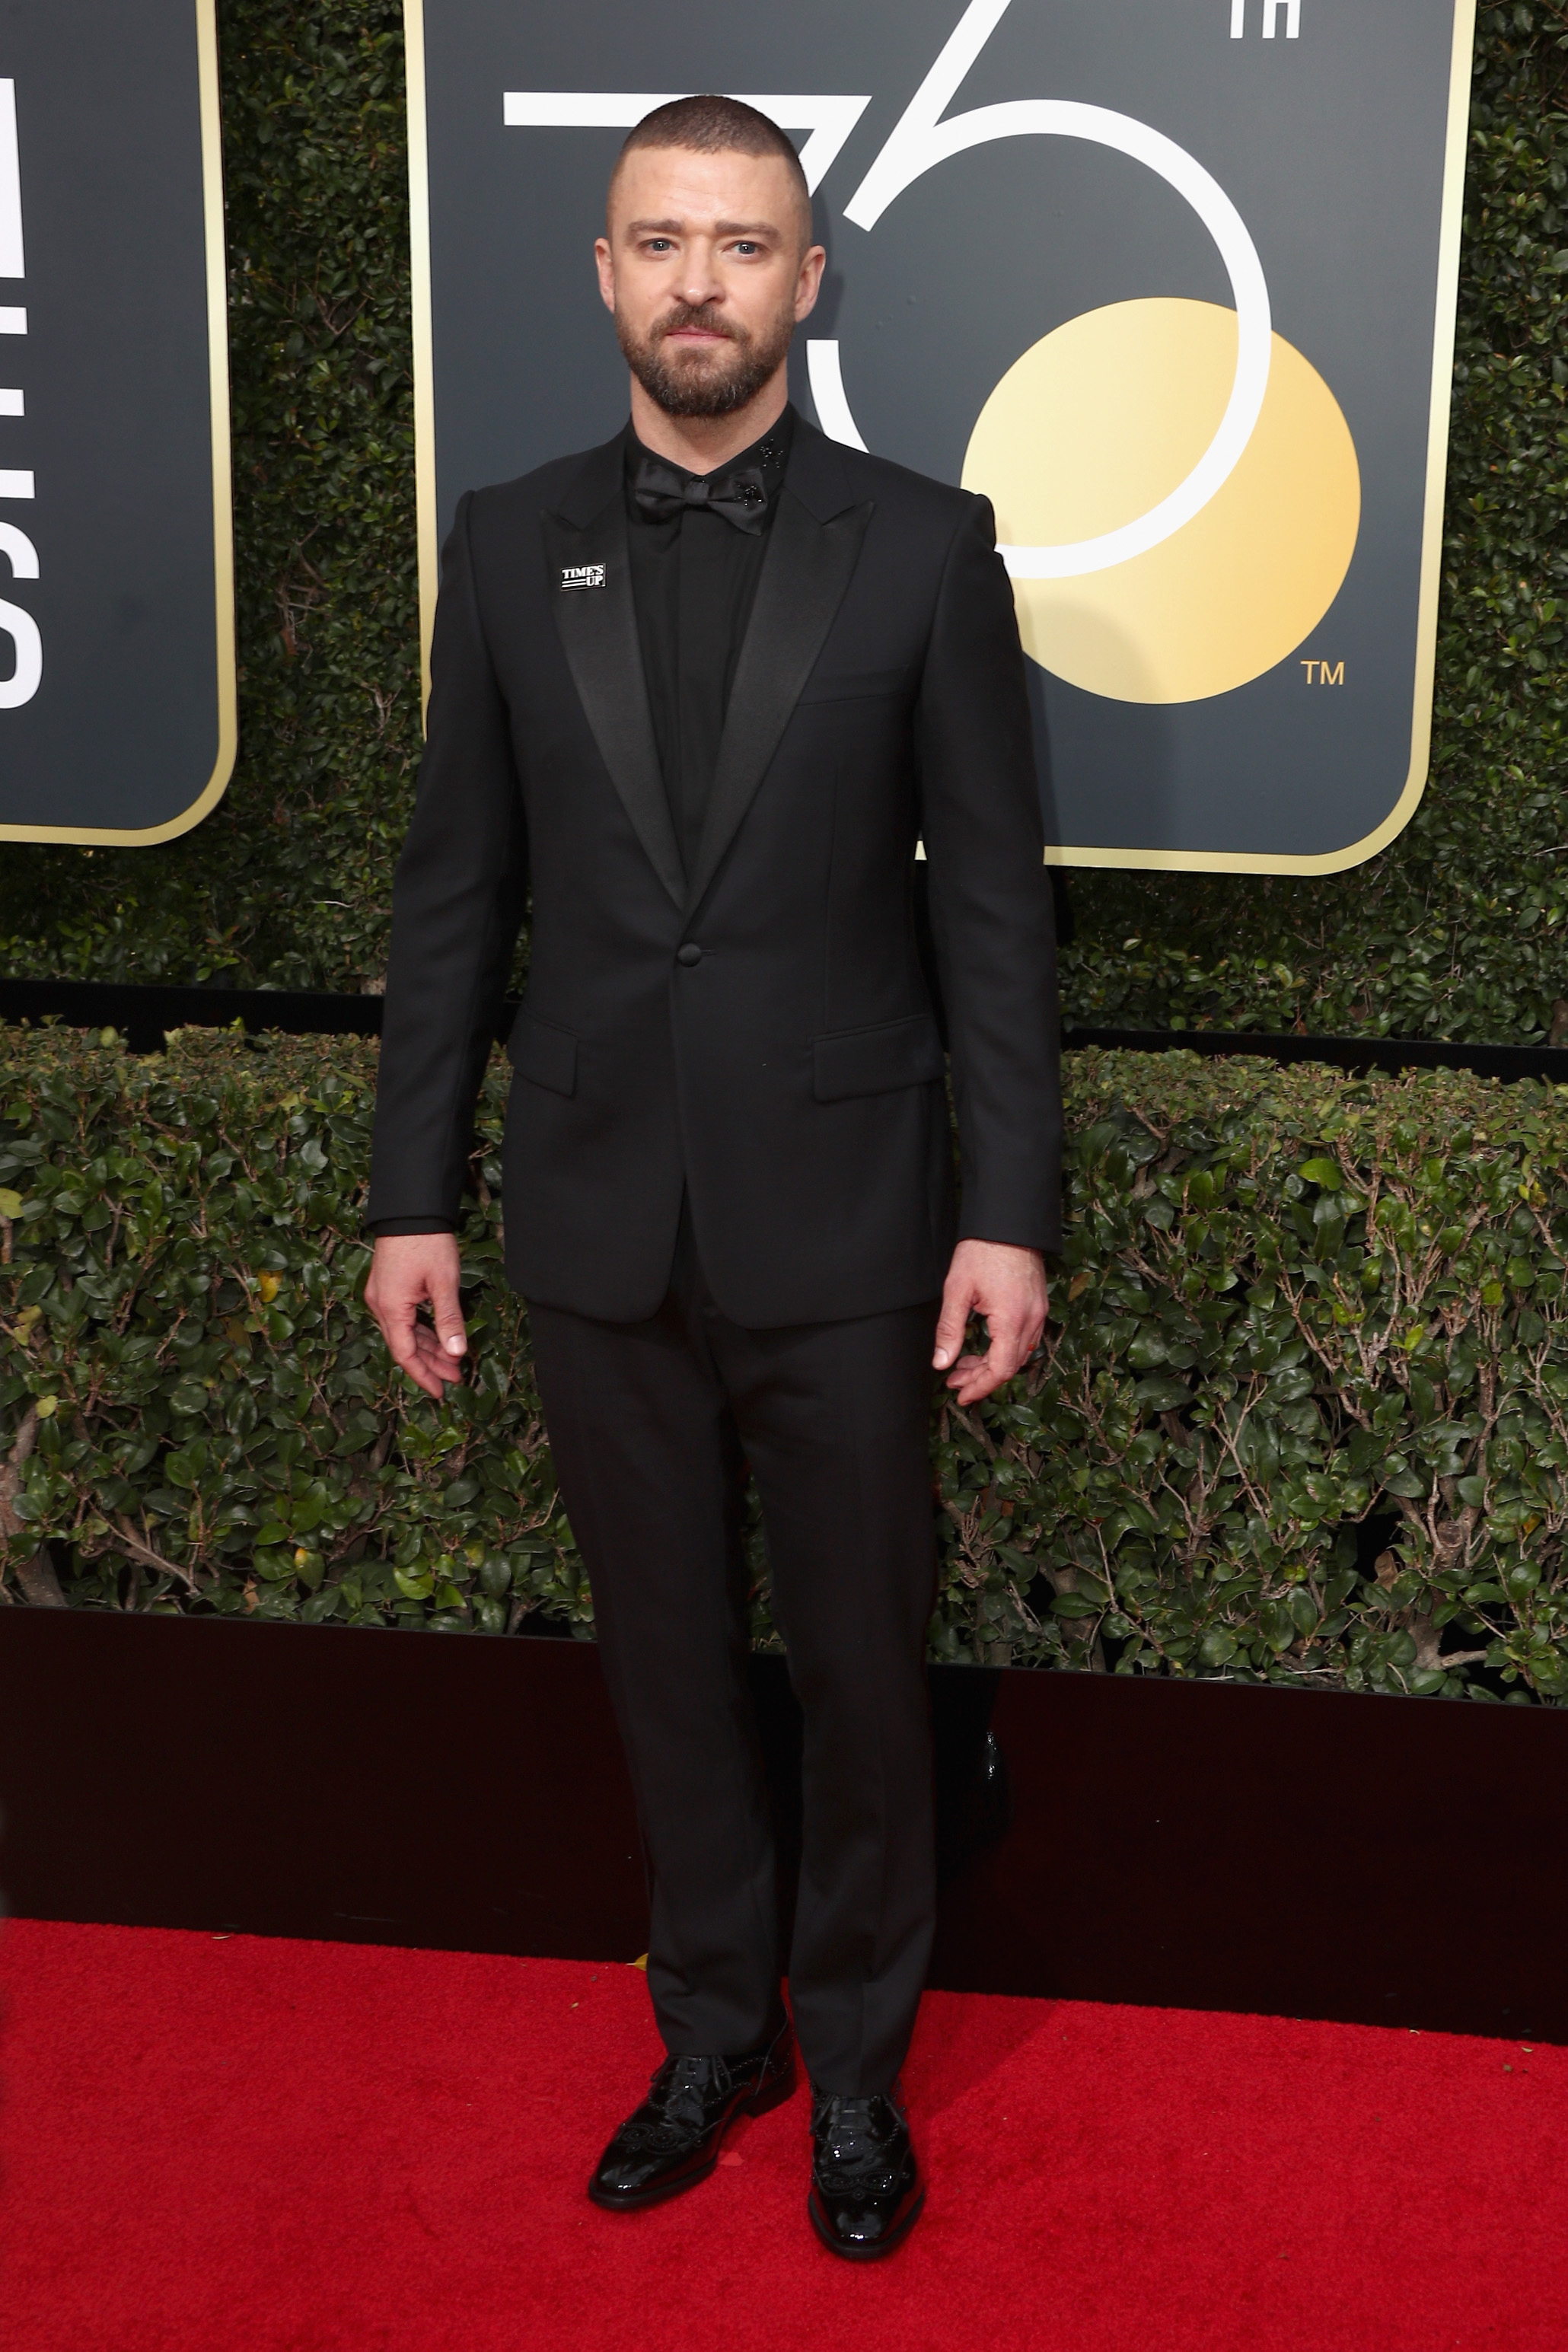 GALLERY: A Look At Justin Timberlake's Sophisticated Style